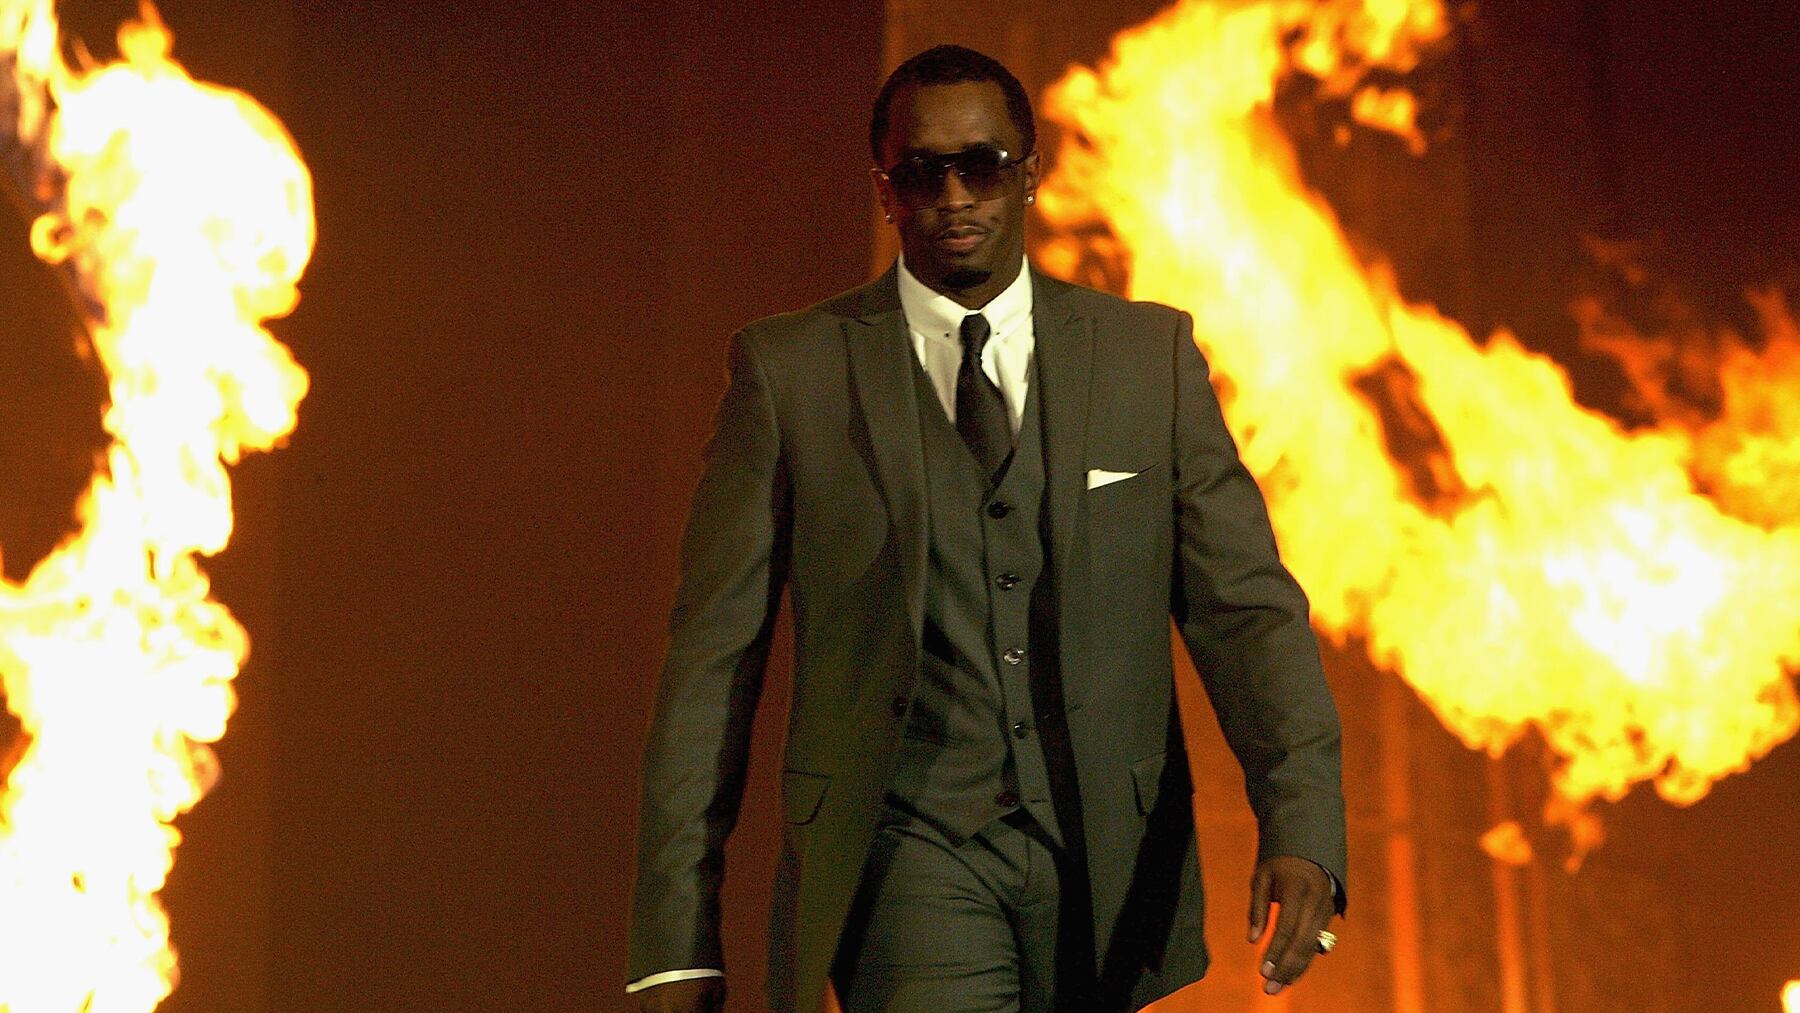 Musician and designer Sean Combs on stage at a fashion show on September 28, 2006.